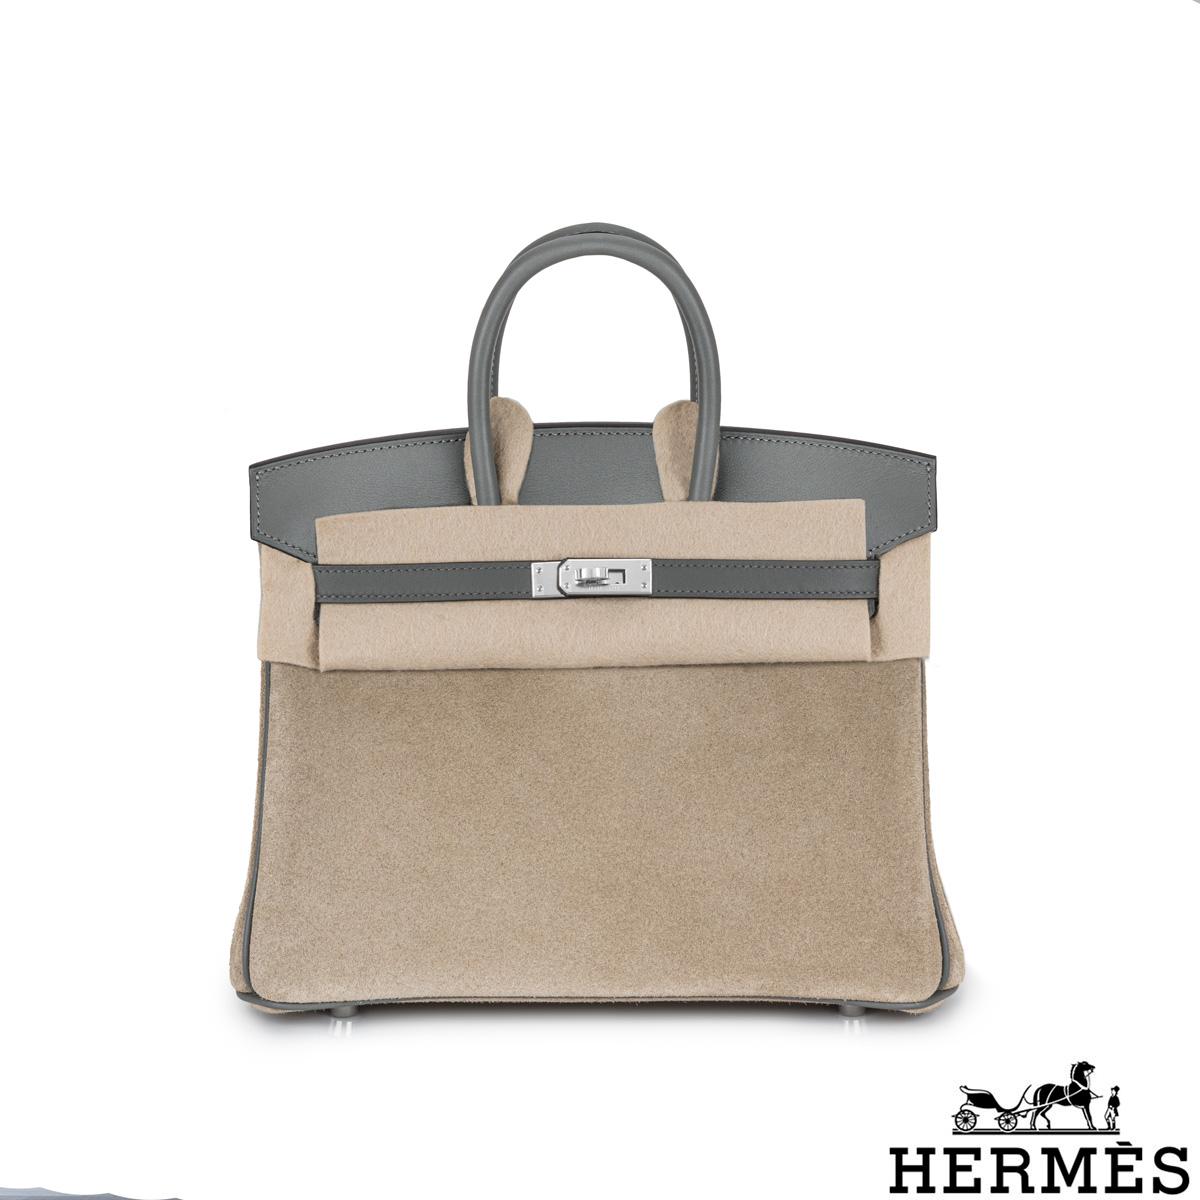 A rare Hermès Birkin 25cm handbag. The Grizzly Birkin is the namesake edition designed to showcase Veau Doblis Suede. The exterior of this Birkin is crafted in Gris Caillou Grizzly and Gris Meyer Veau Swift leather with tonal stitching. It features